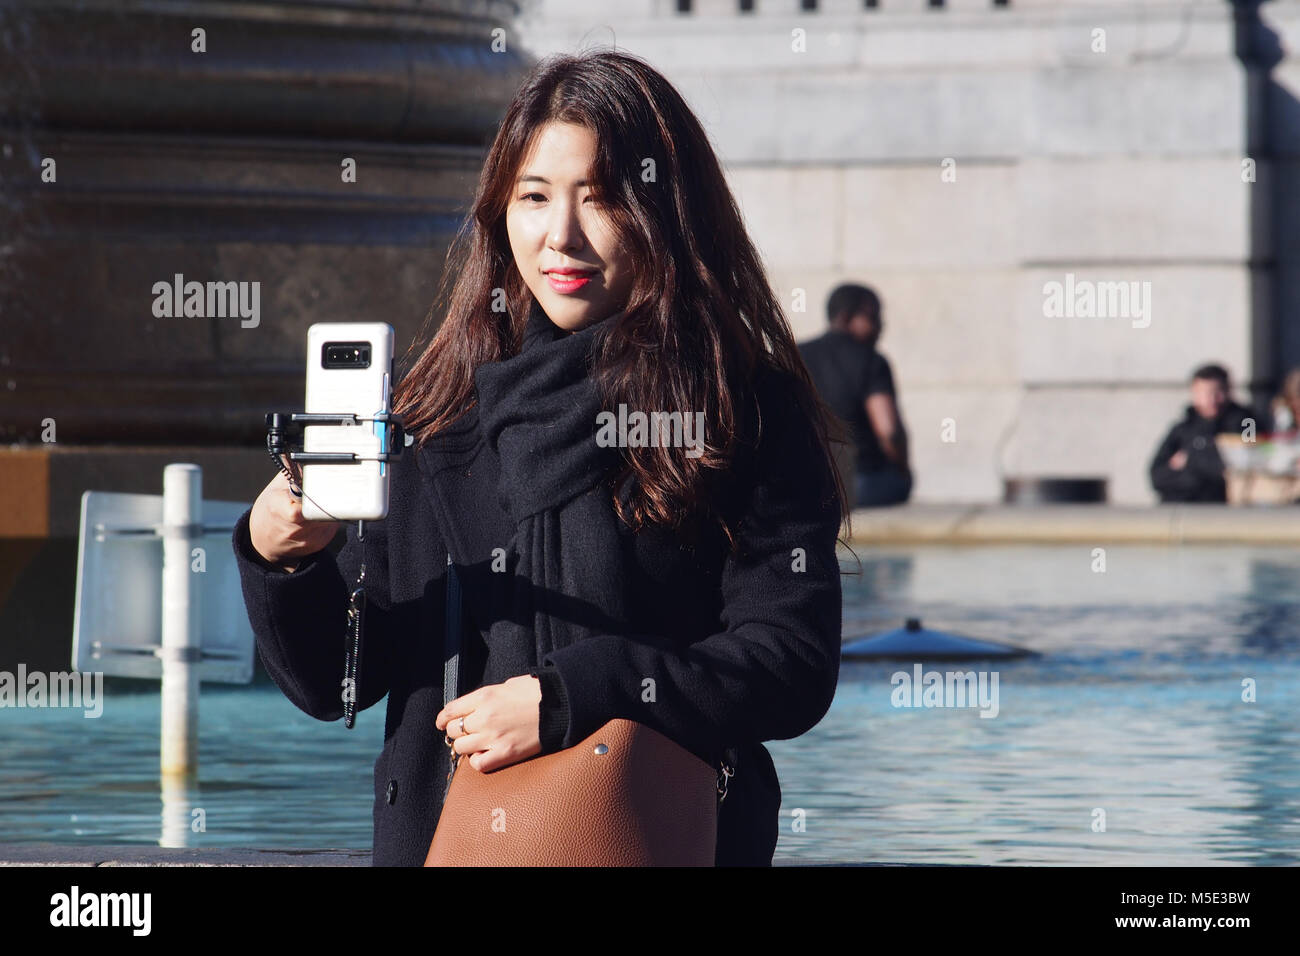 A young oriental woman taking a selfie in the winter sunshine next to a pool in Trafalgar Square, London using a selfie stick Stock Photo